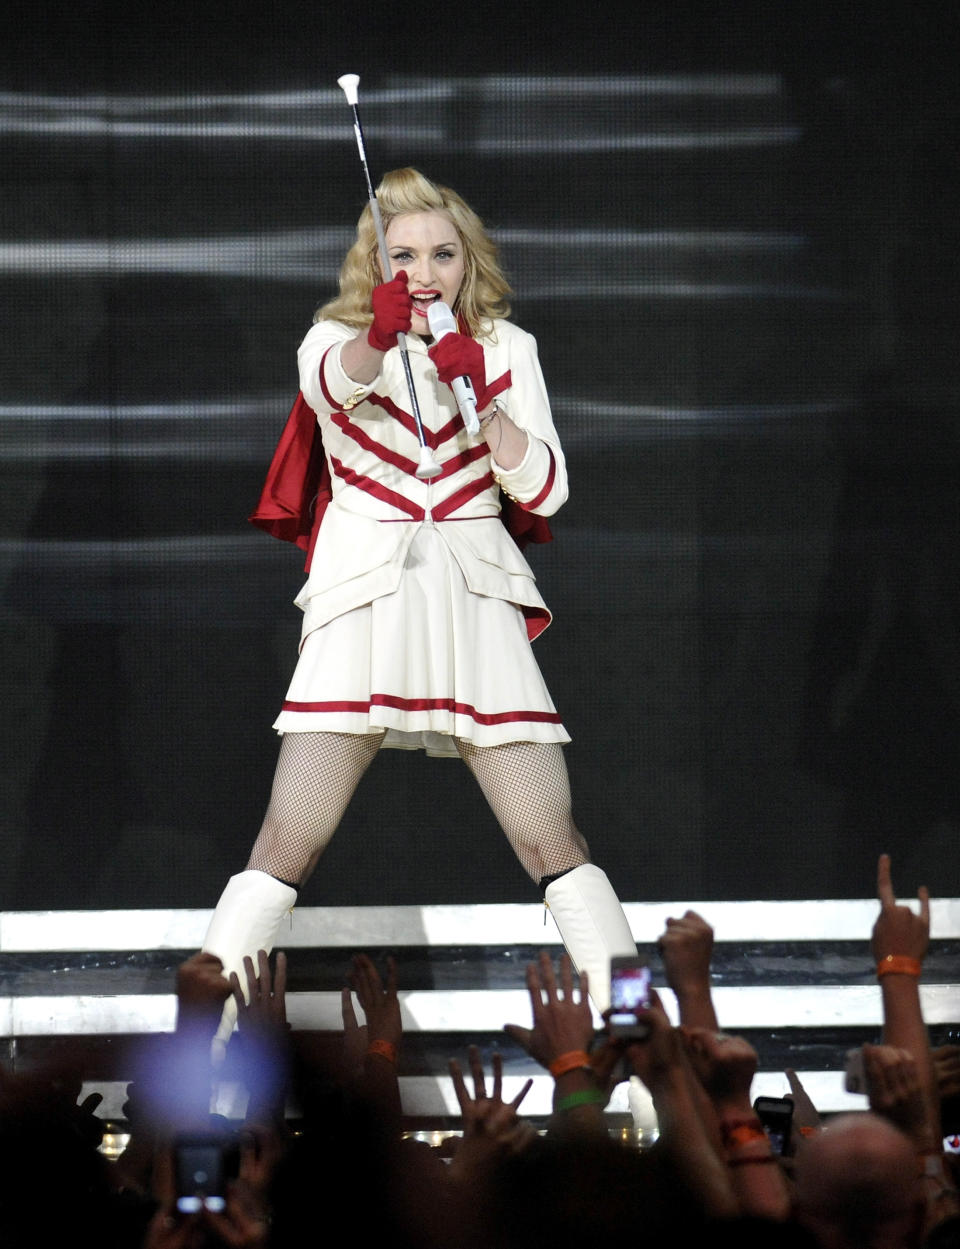 Singer Madonna performs at the Wells Fargo Center on Tuesday Aug. 28, 2012 in Philadelphia. (Photo by Evan Agostini/Invision/AP)